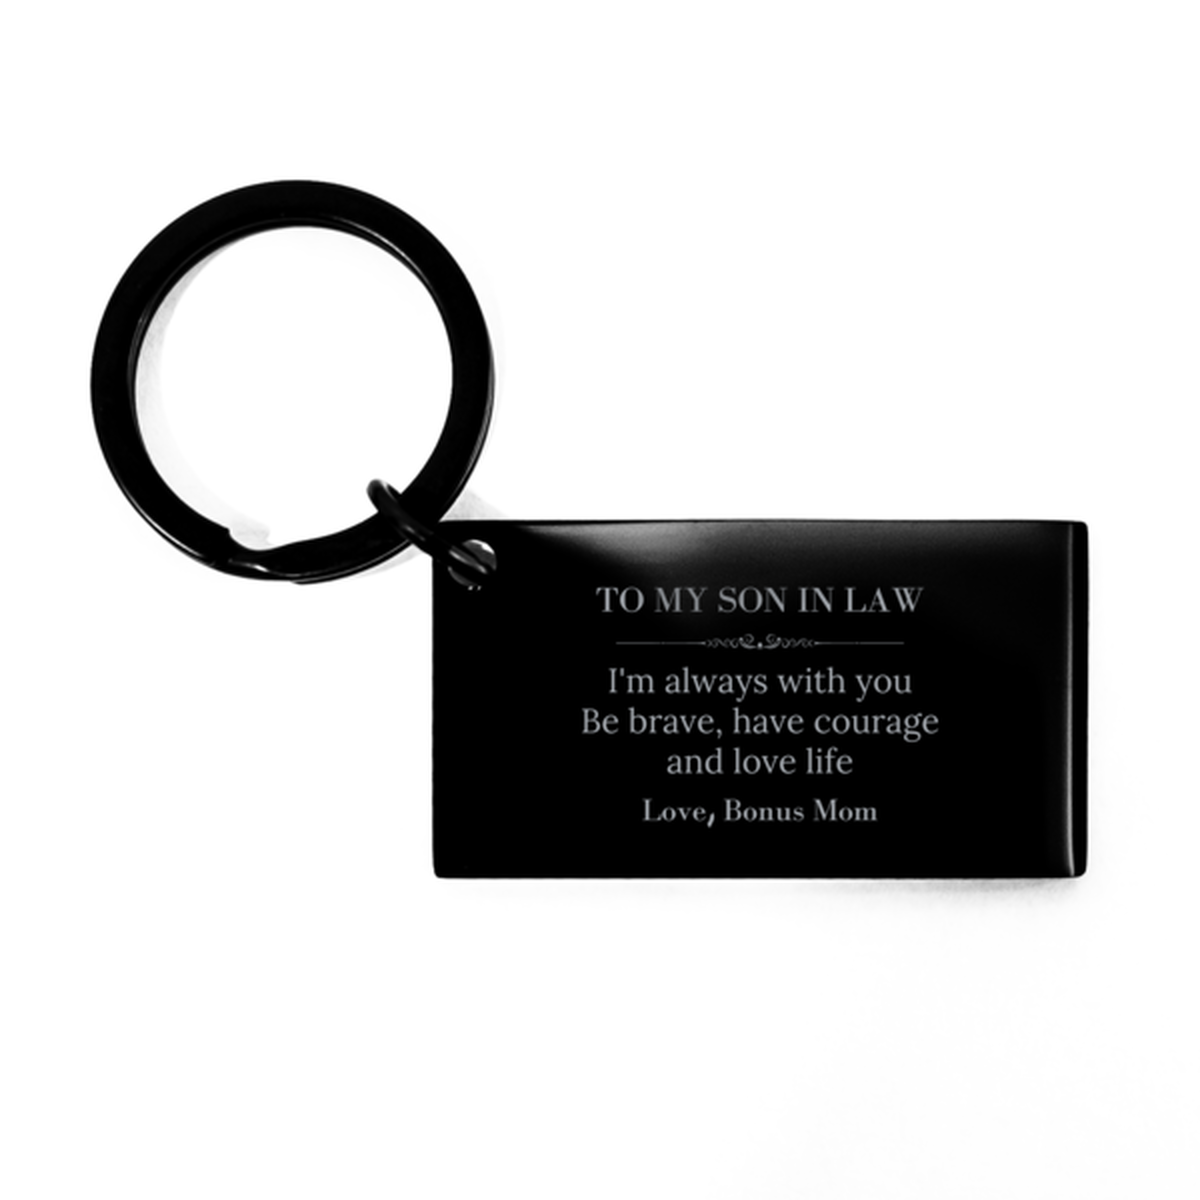 To My Son In Law Gifts from Bonus Mom, Unique Keychain Inspirational Christmas Birthday Graduation Gifts for Son In Law I'm always with you. Be brave, have courage and love life. Love, Bonus Mom